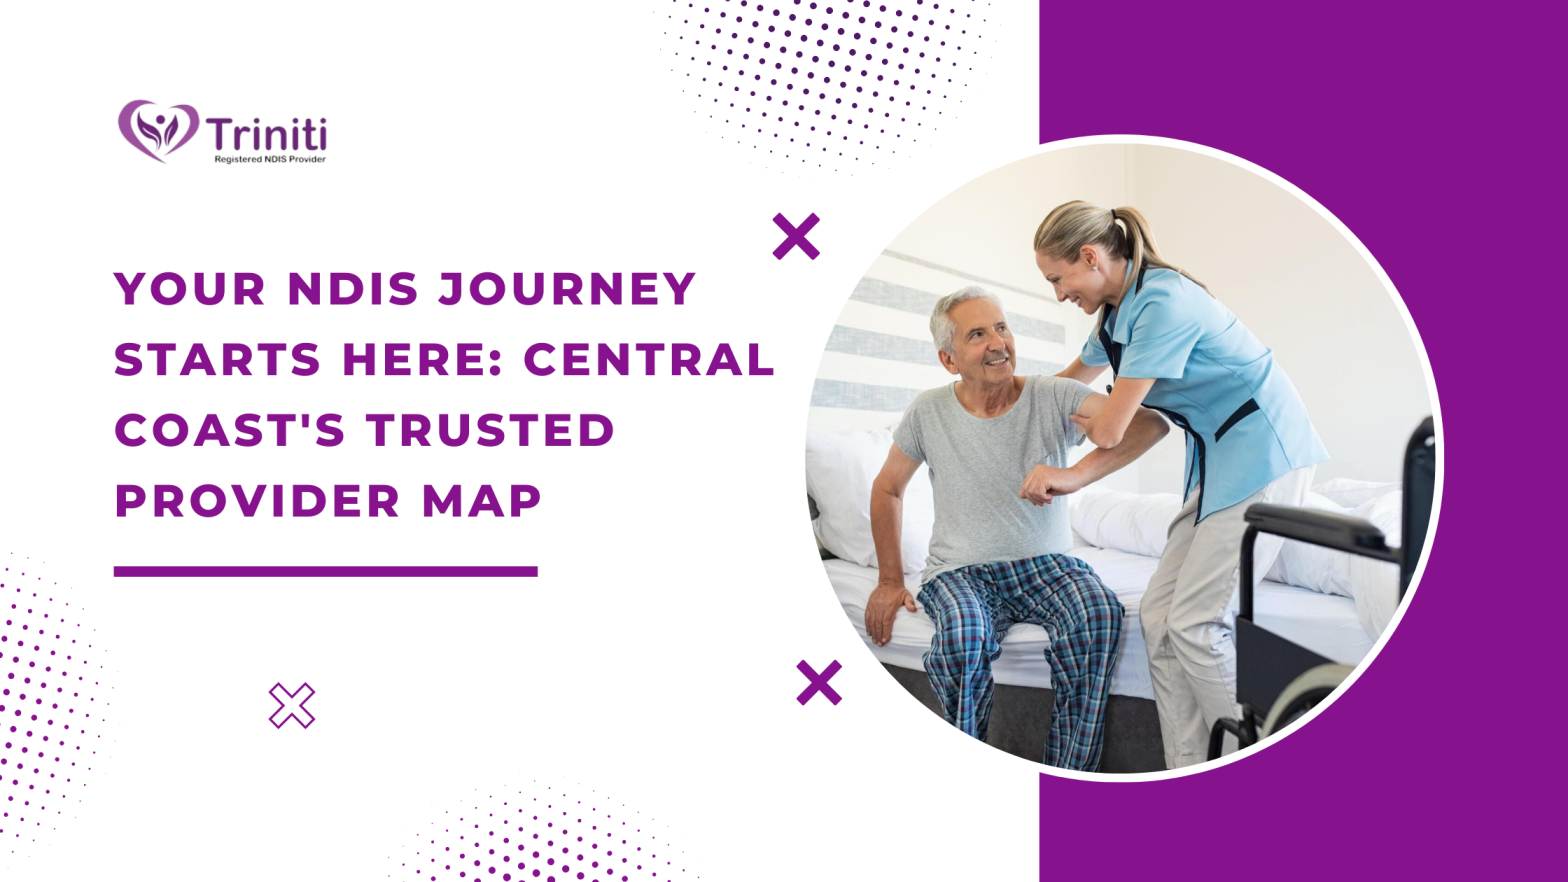 Your NDIS Journey Starts Here: Central Coast’s Trusted Provider Map